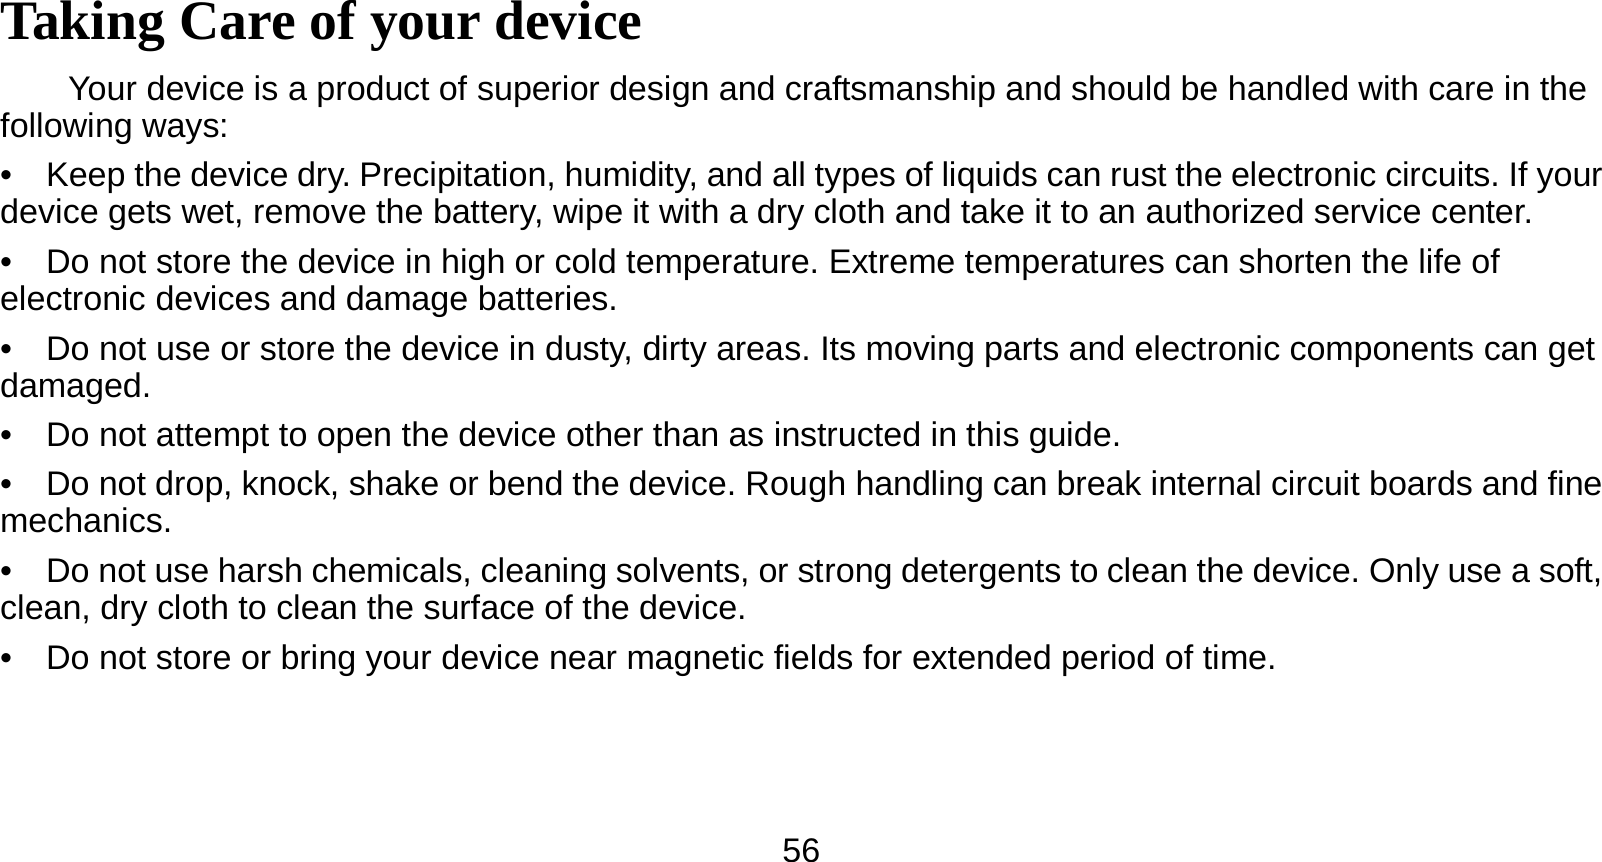   56 Taking Care of your device Your device is a product of superior design and craftsmanship and should be handled with care in the following ways: •    Keep the device dry. Precipitation, humidity, and all types of liquids can rust the electronic circuits. If your device gets wet, remove the battery, wipe it with a dry cloth and take it to an authorized service center. •    Do not store the device in high or cold temperature. Extreme temperatures can shorten the life of electronic devices and damage batteries. •    Do not use or store the device in dusty, dirty areas. Its moving parts and electronic components can get damaged. •    Do not attempt to open the device other than as instructed in this guide. •    Do not drop, knock, shake or bend the device. Rough handling can break internal circuit boards and fine mechanics. •    Do not use harsh chemicals, cleaning solvents, or strong detergents to clean the device. Only use a soft, clean, dry cloth to clean the surface of the device. •    Do not store or bring your device near magnetic fields for extended period of time. 